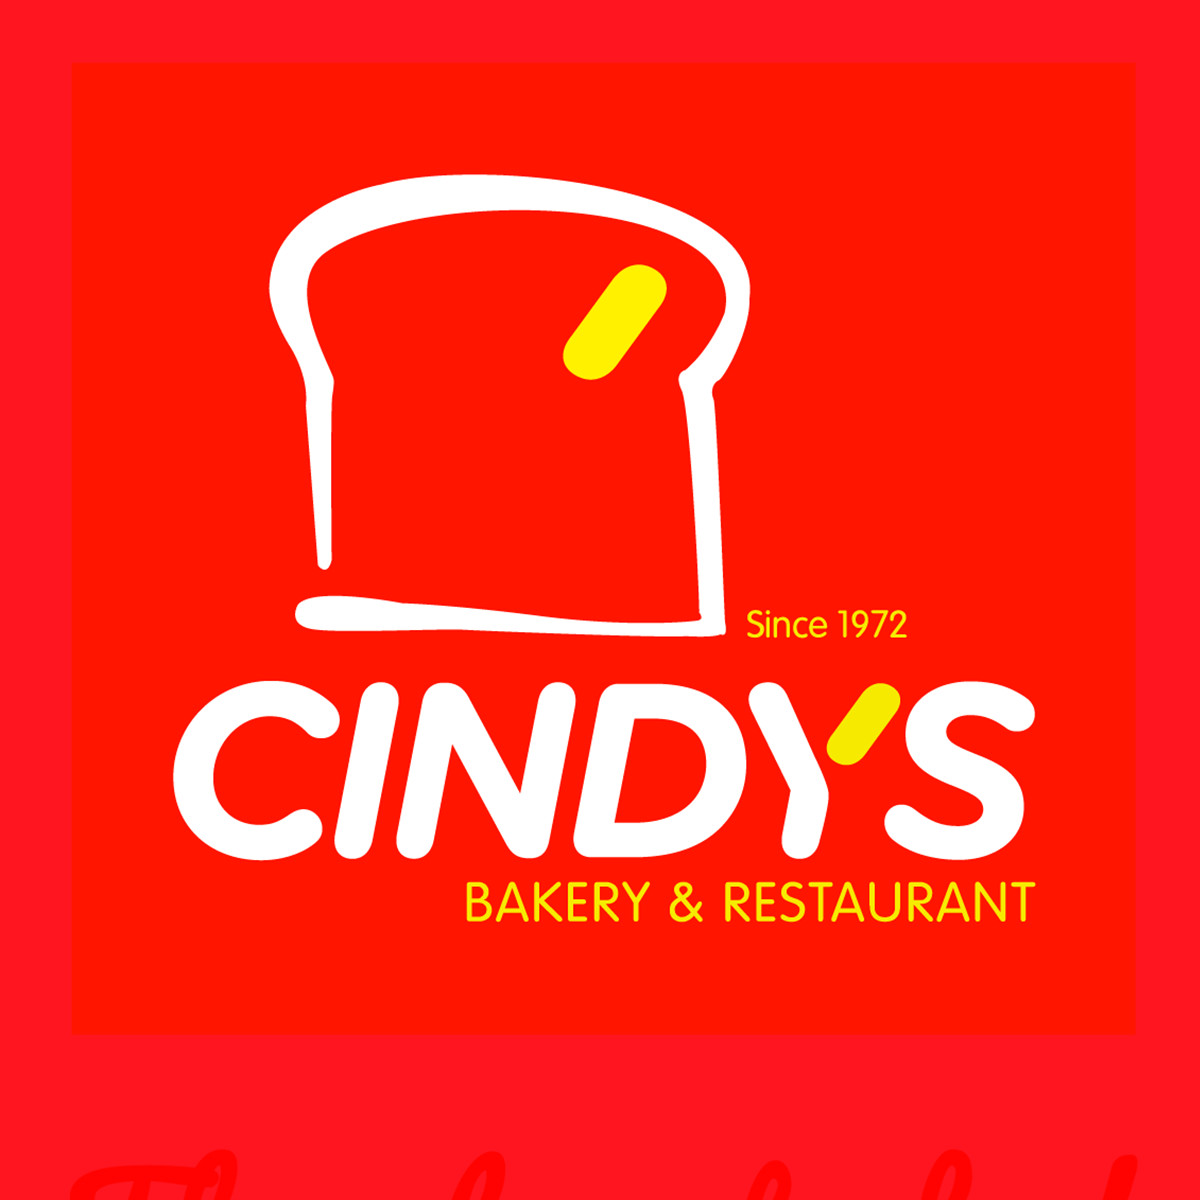 Cindys Bakery And Restaurant Primark Town Center Cauayan City Isabela Bakery Fast Food